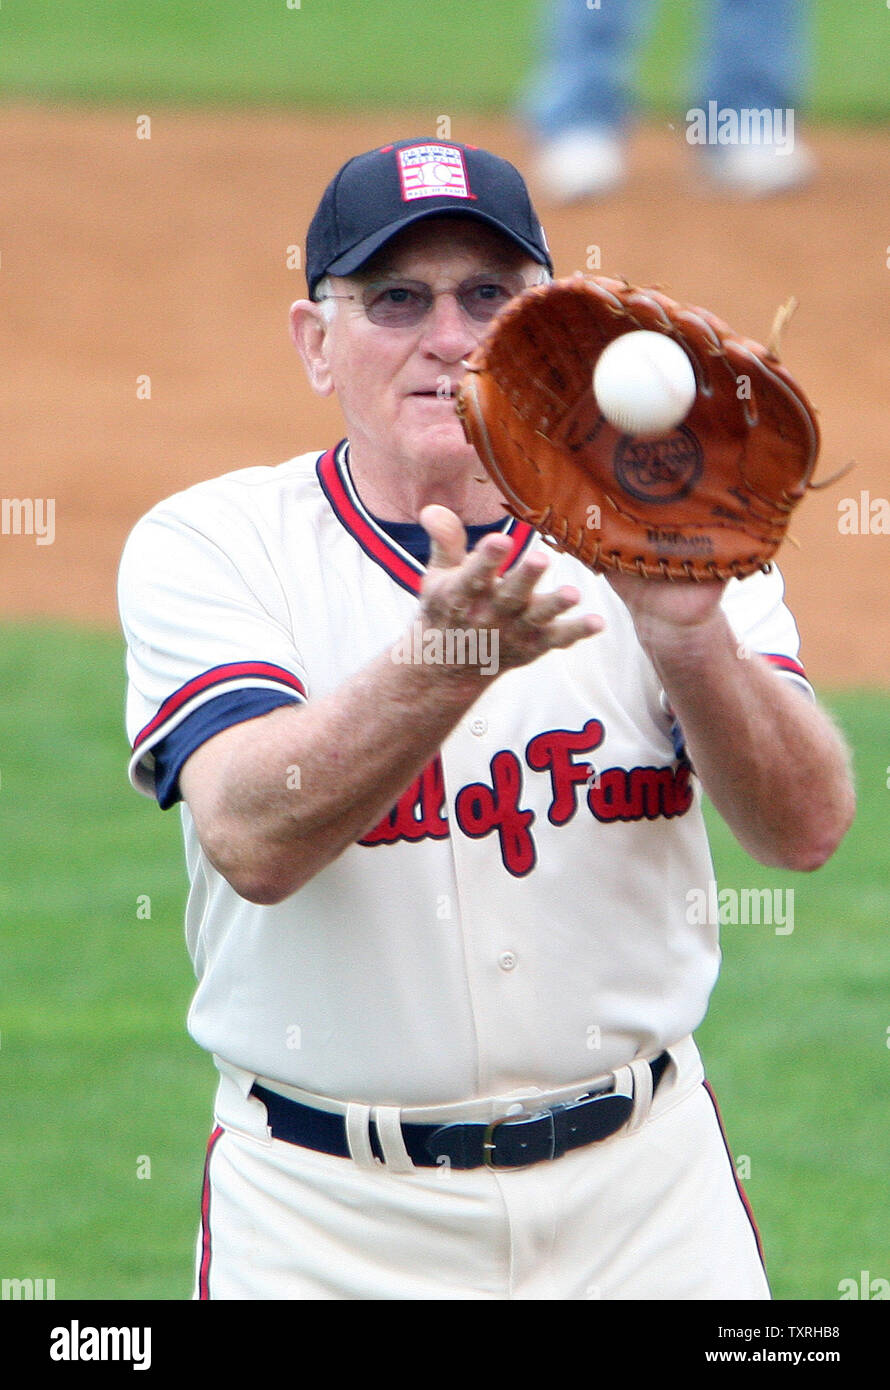 Harmon Killebrew, member of the National Baseball Hall of Fame, plays catch with a fan while participating in 'Play Ball,' during Induction week in Cooperstown, New York on July 24, 2009. Former players Rickey Henderson, Jim Rice and Joe Gordon will be welcomed into the hall as the Class of 2009 on July 26. (UPI Photo/Bill Greenblatt) Stock Photo